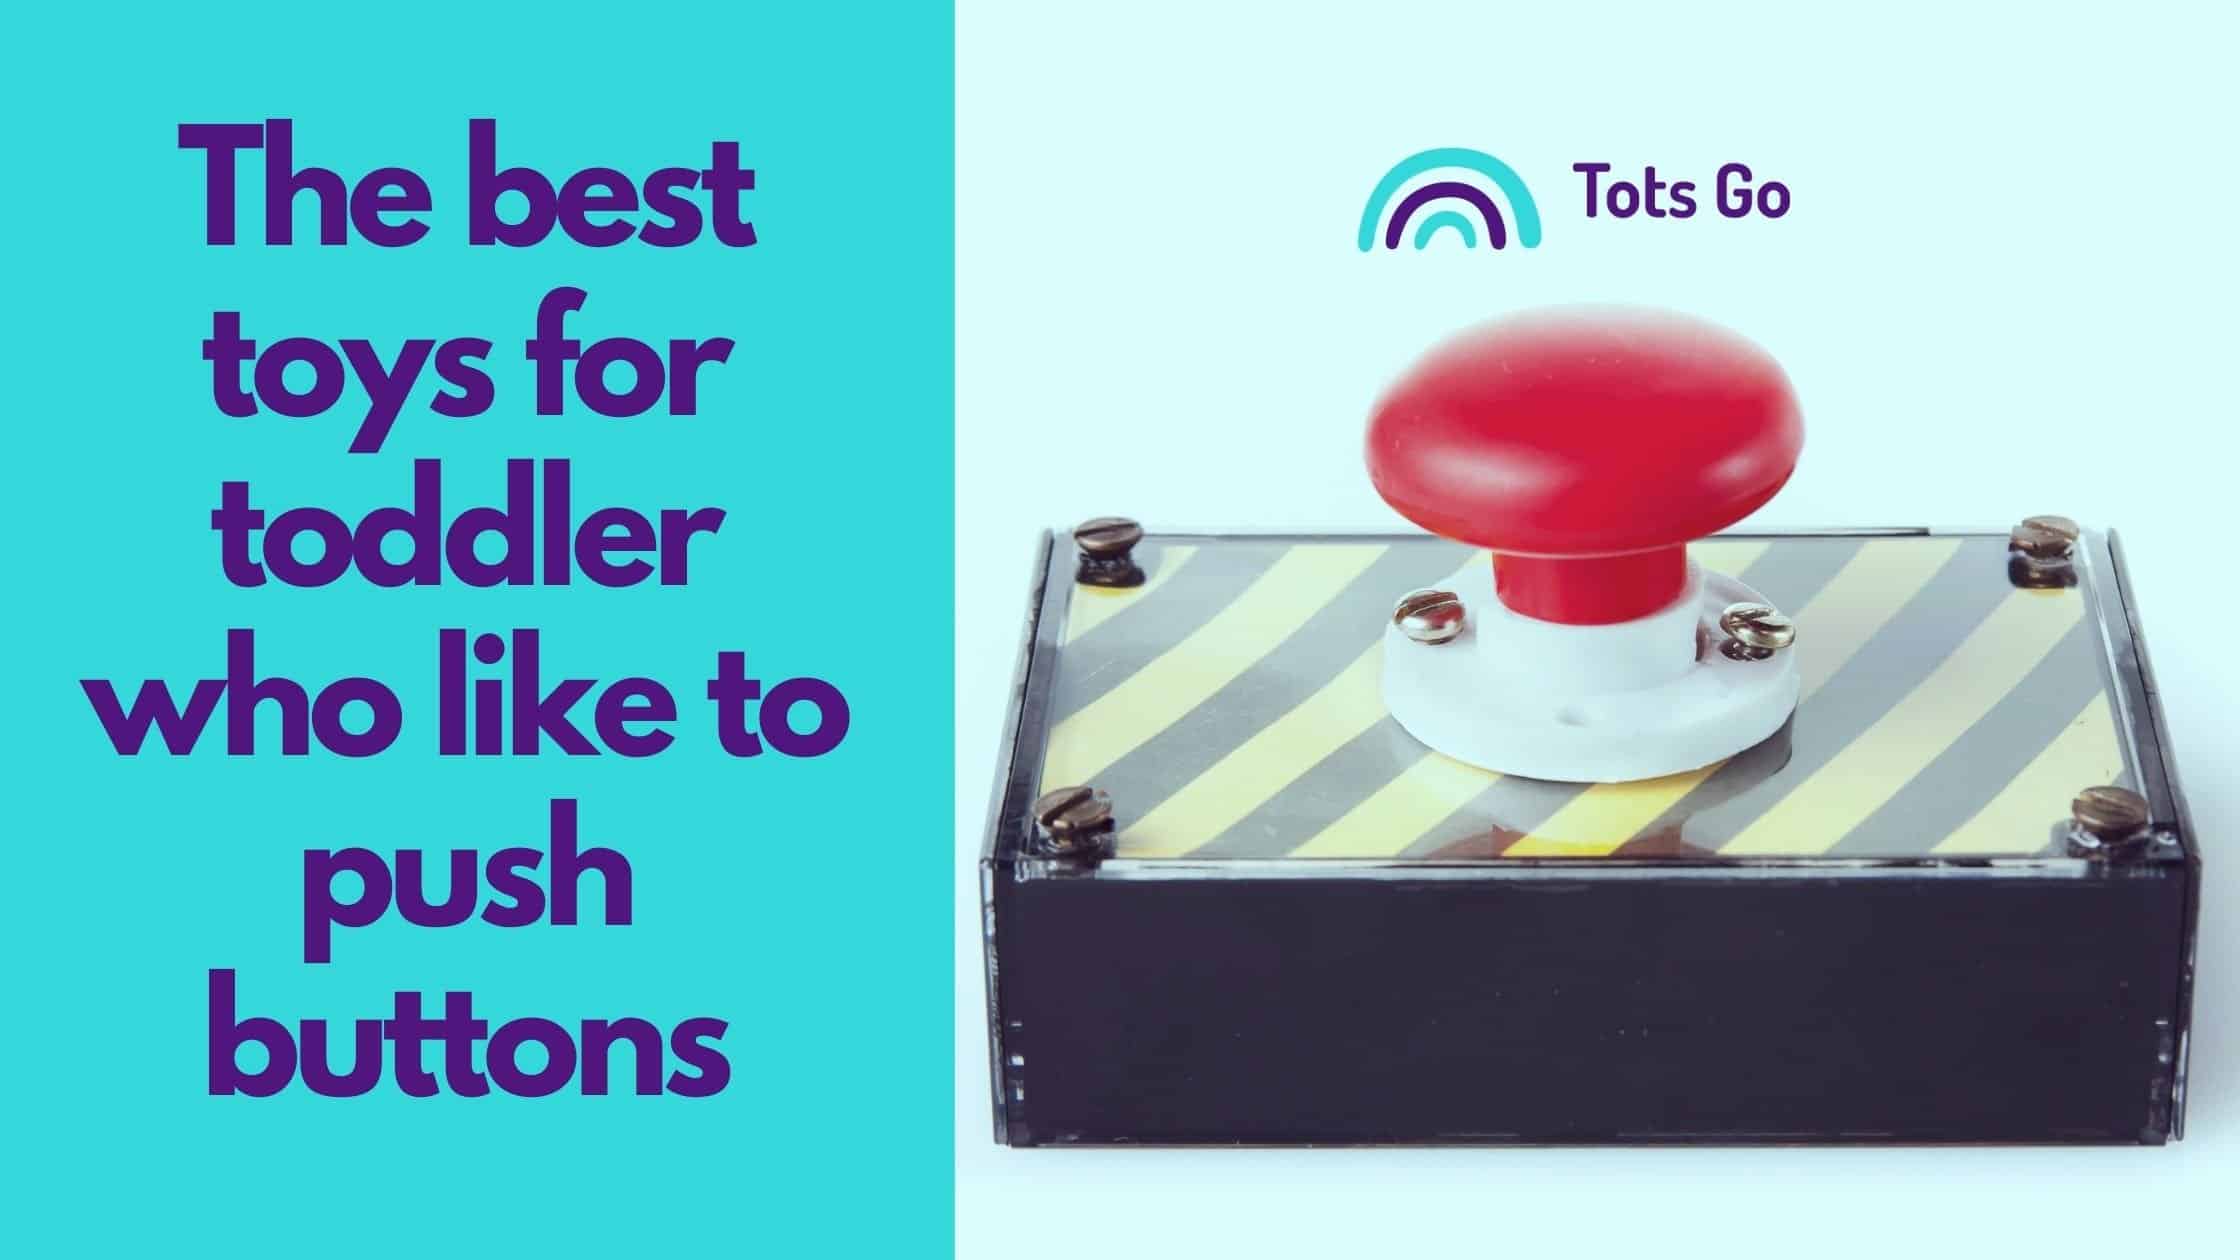 The best toys for toddler who like to push buttons (1)